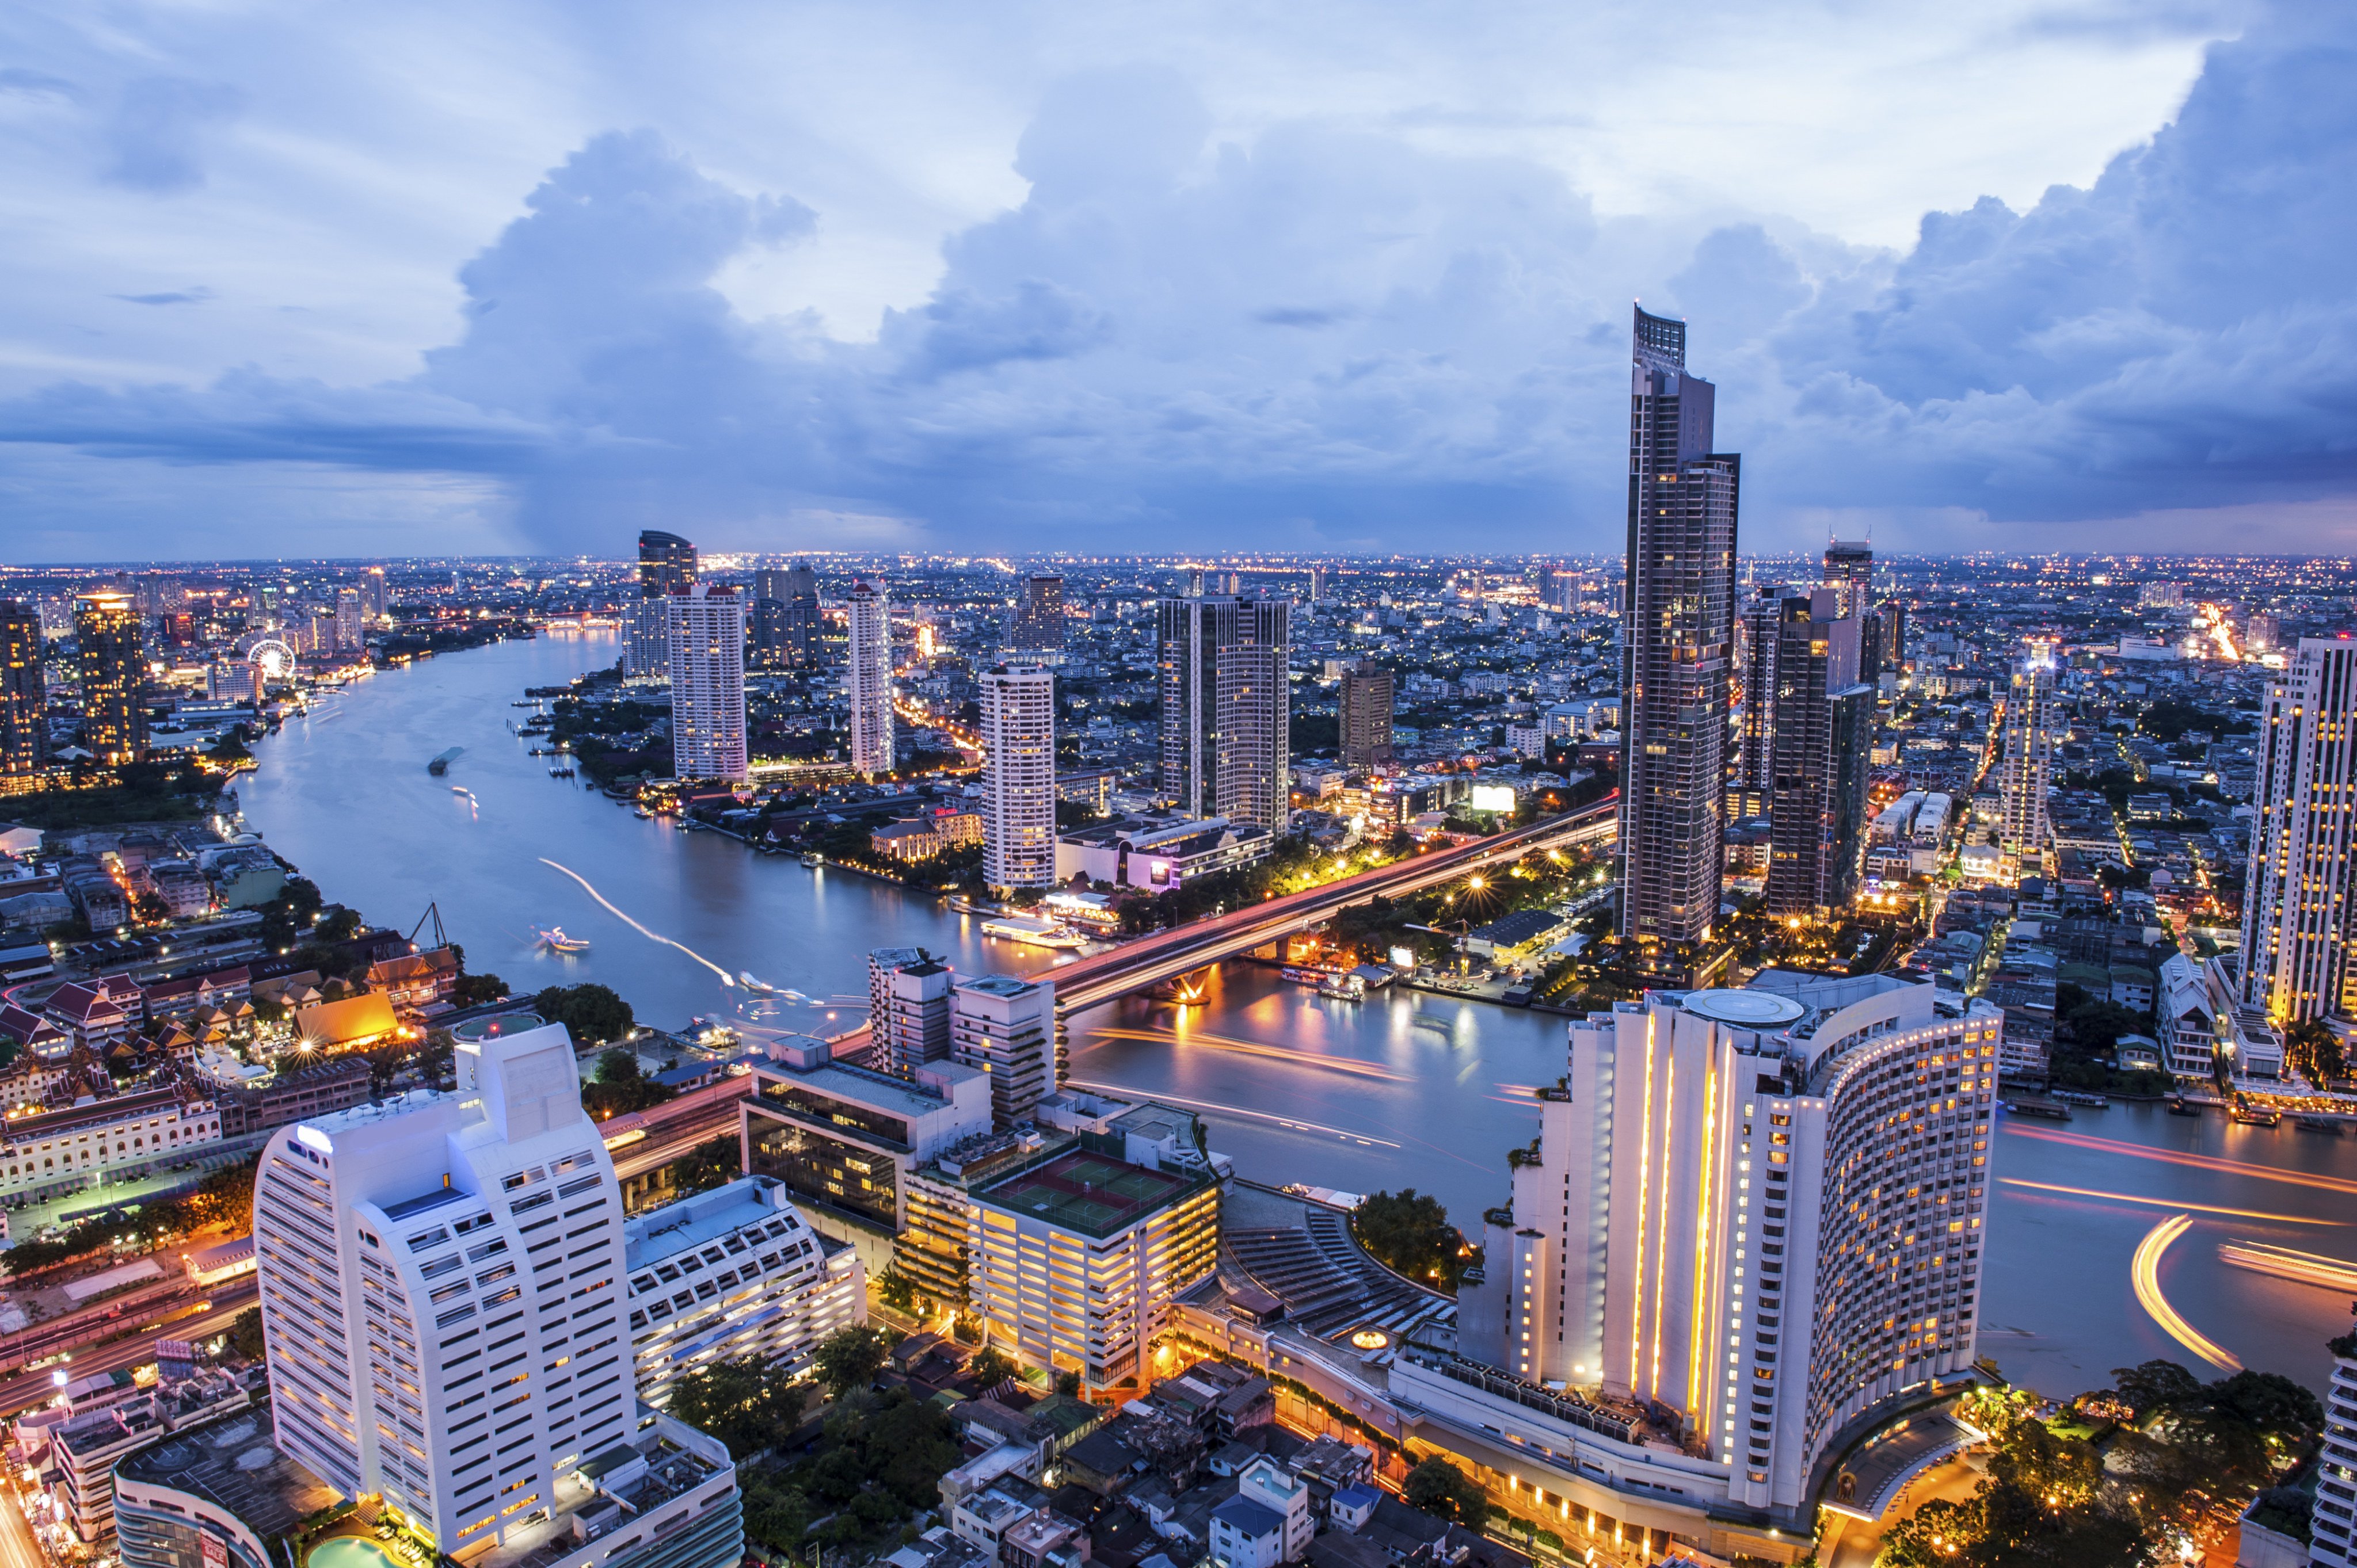 Thailand has pushed to extend holidaymakers’ stay and boost the number of foreign tourists, and pitched the country as an ideal location to host motor races. Photo: Getty